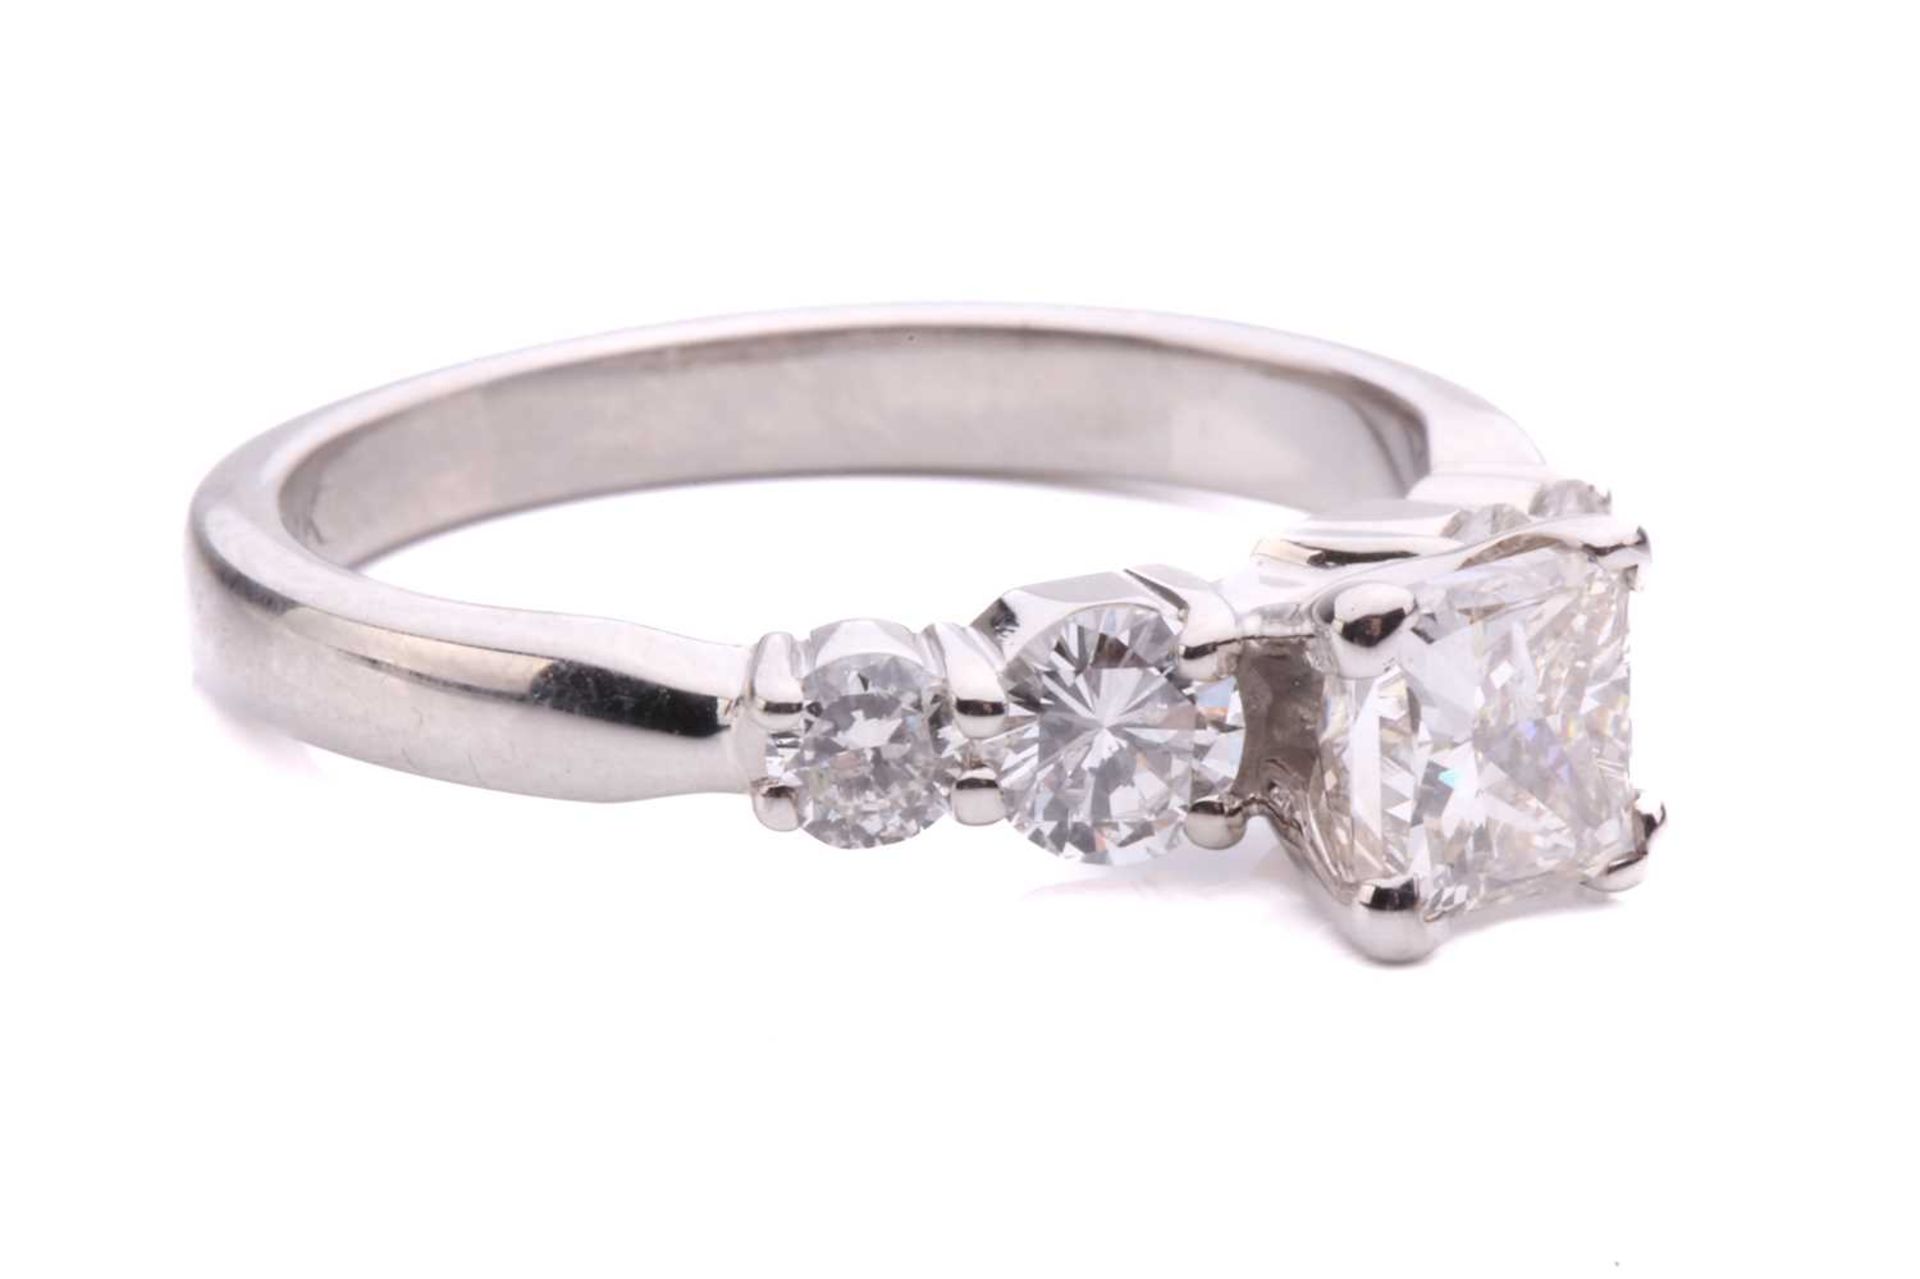 A princess-cut diamond ring with diamond set shoulders, with a central claw set princess-cut diamond - Image 4 of 5